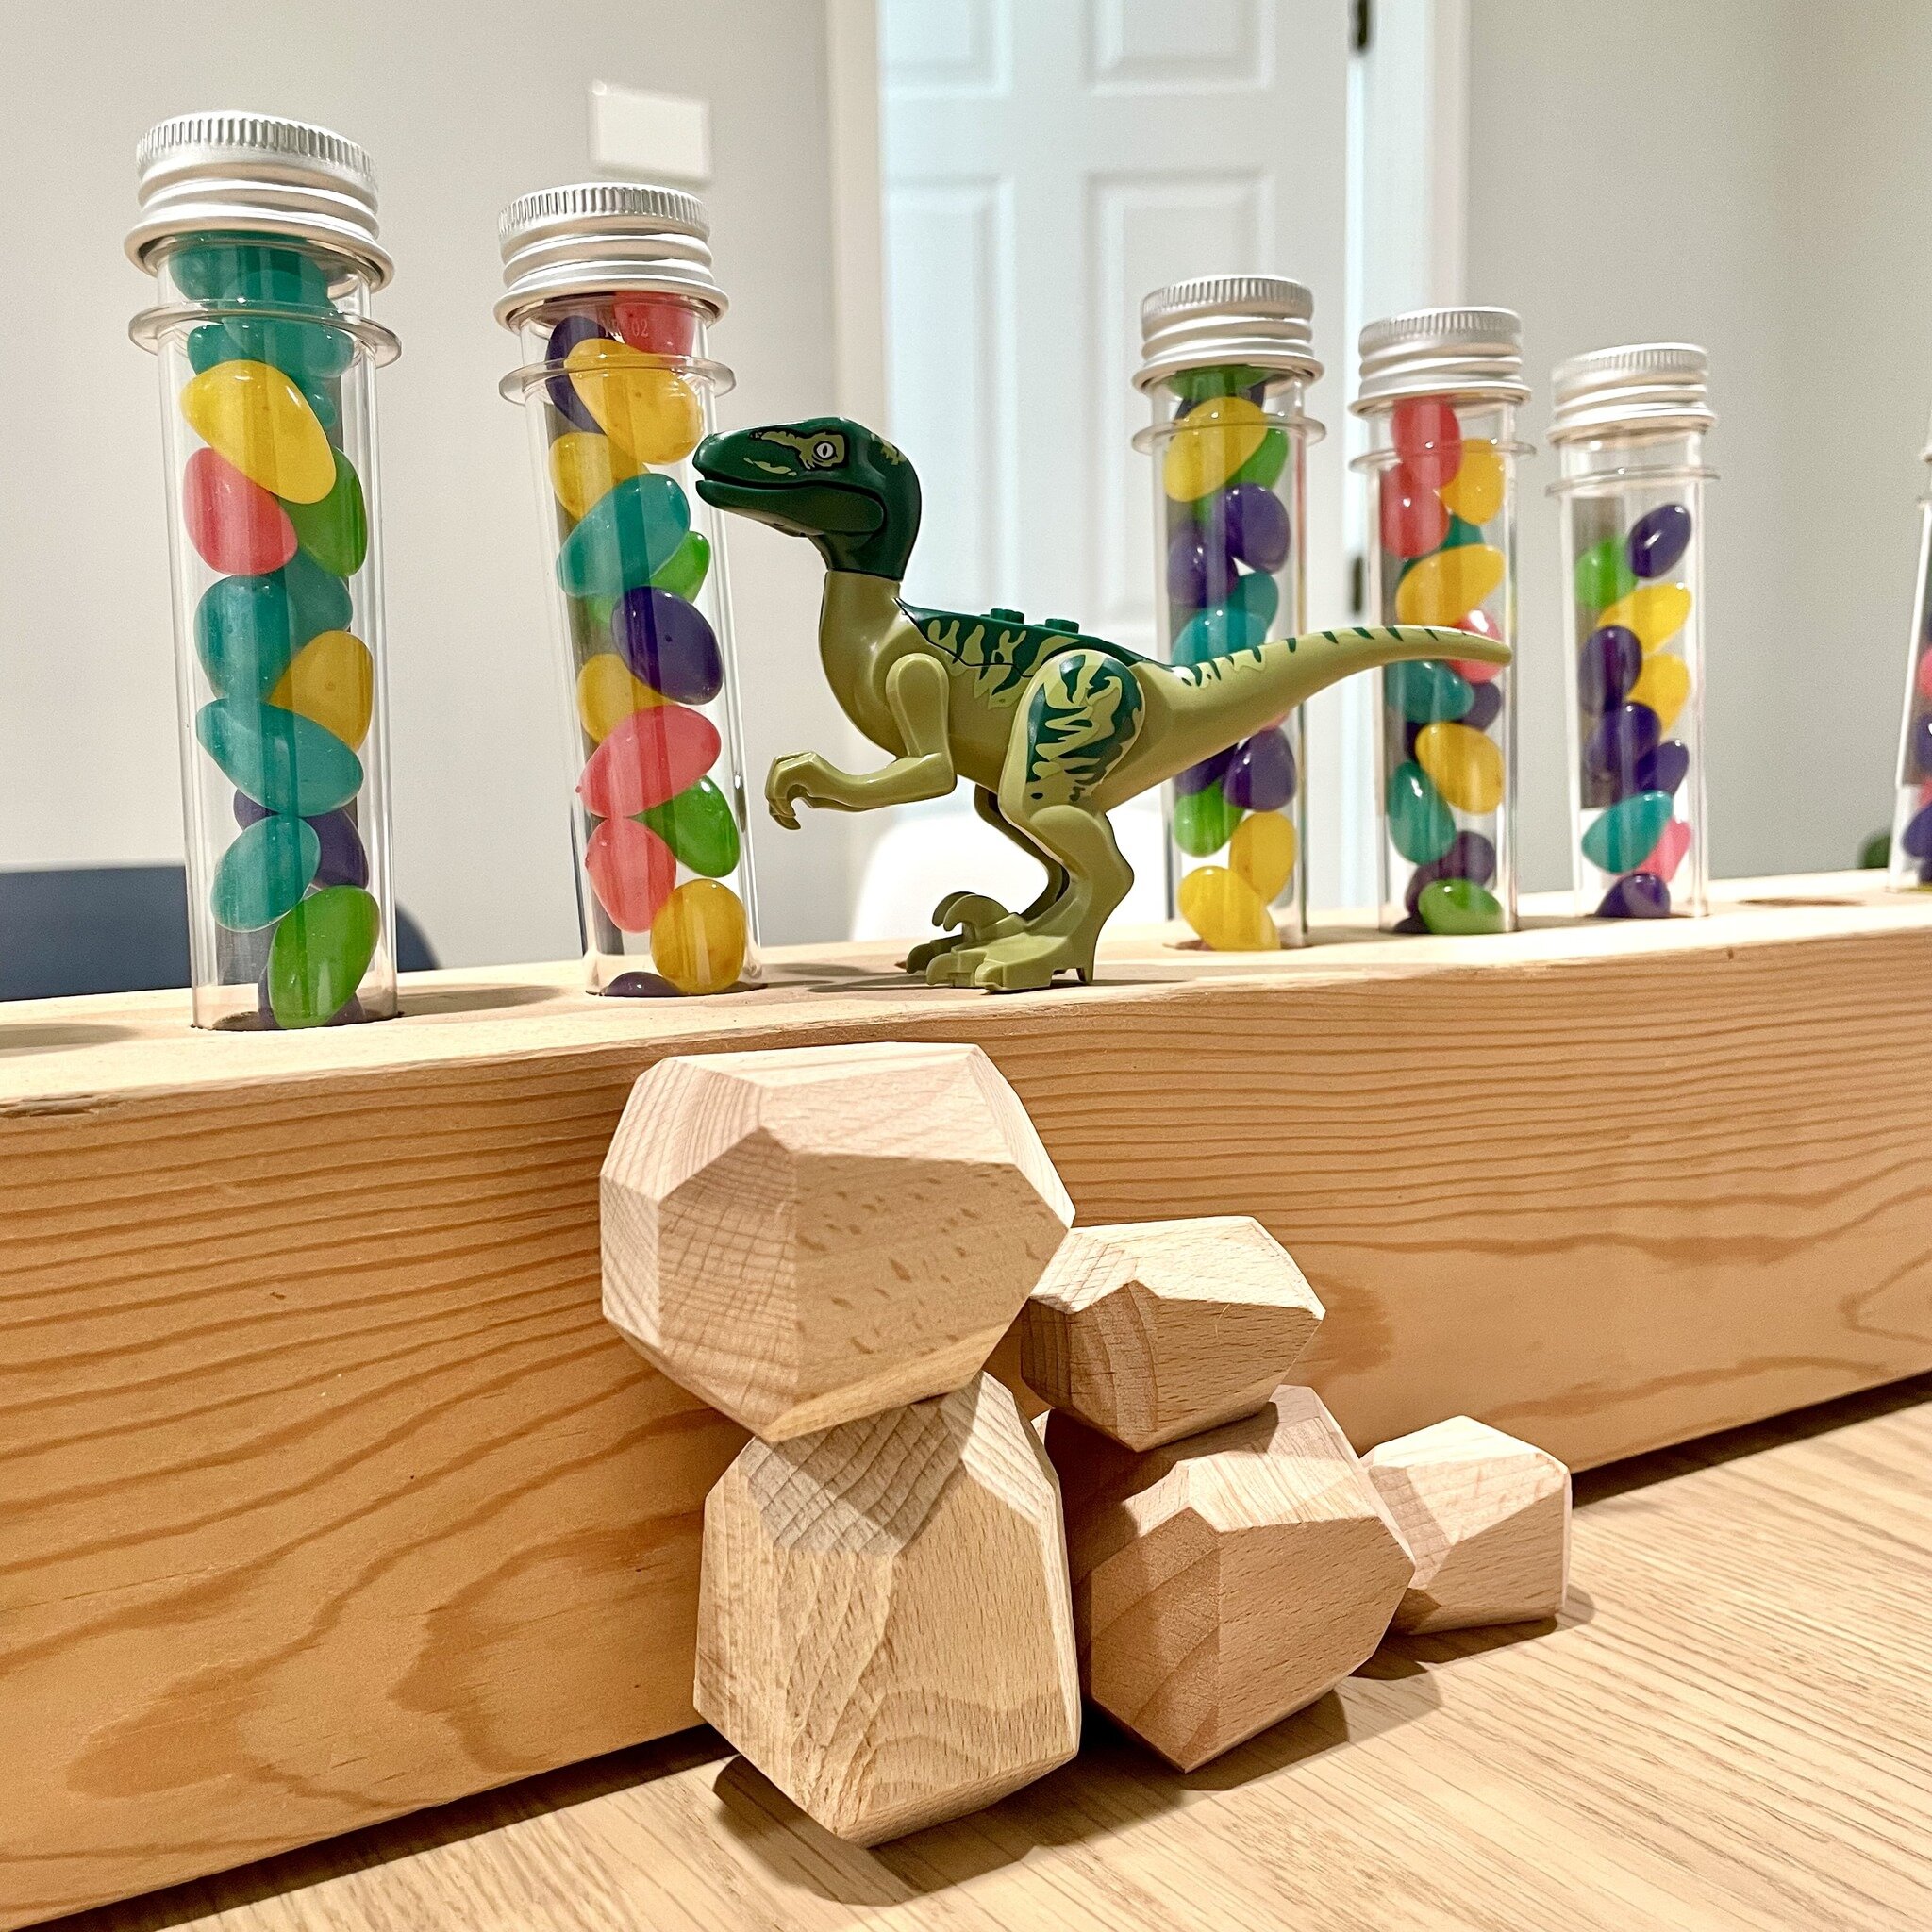 Barry just couldn't resist the jelly beans, he's a real dino-mite candy thief! 🦖🍬💥

#coworkingspace #coworkhighriver #coworking #coworkingspaces #coworkingoffice #highriver #okotoks #yyc #nanton #newbusiness #collaboration #community #okotoksbusin